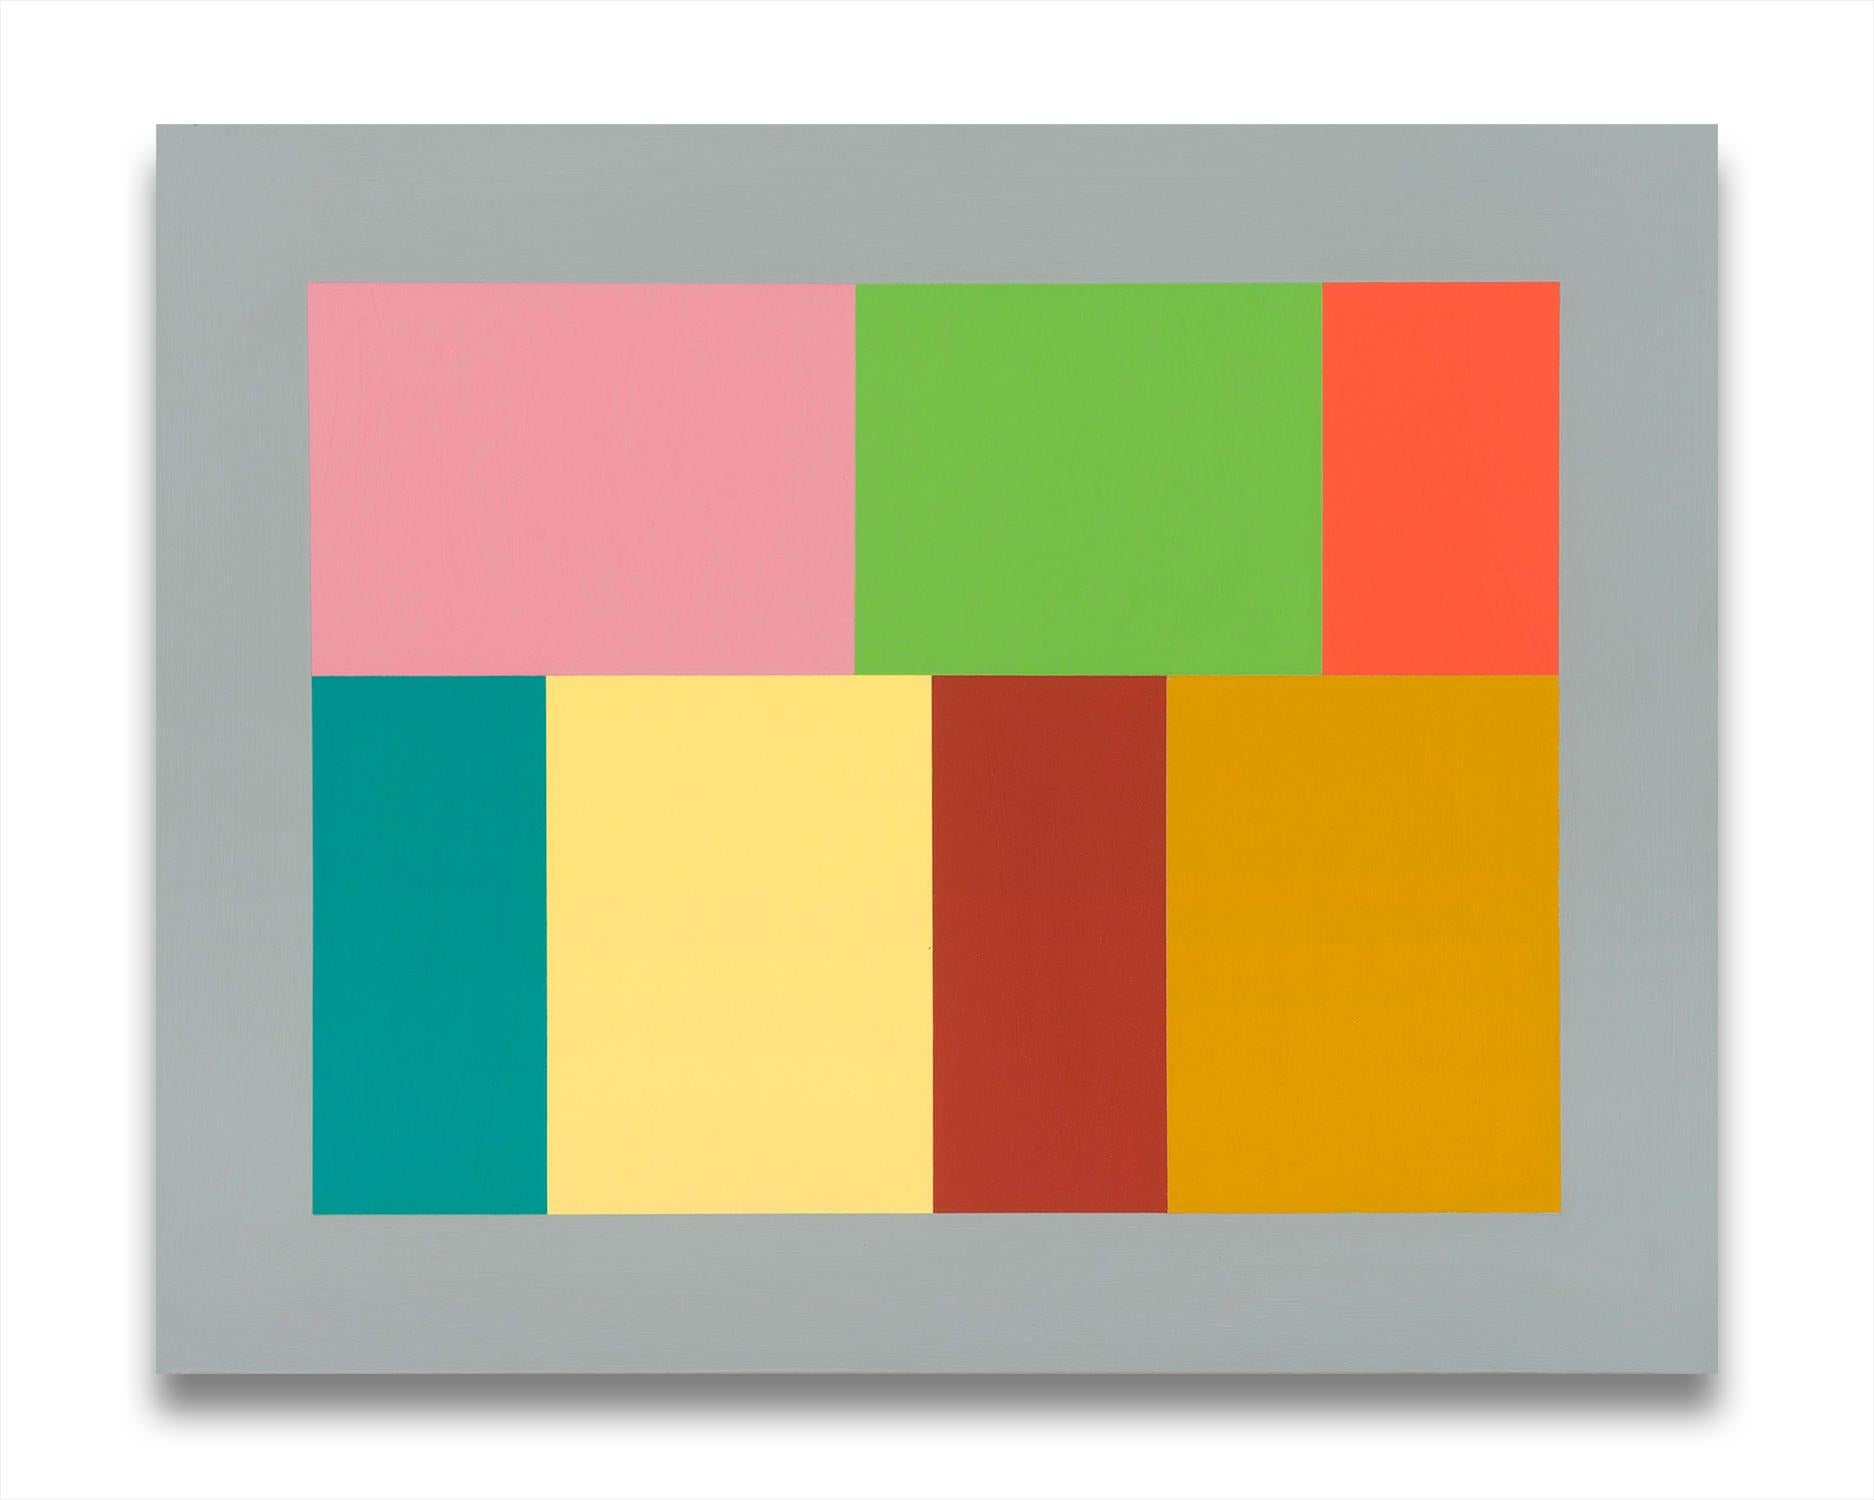 Small Test Pattern 2 (Abstract Painting)

Acrylic/gouache on wood - Unframed

Test Pattern series sets up a generic template as a poetic prompt to consider how behavioural responses to color and form stimulate an abstract sense of contemporary